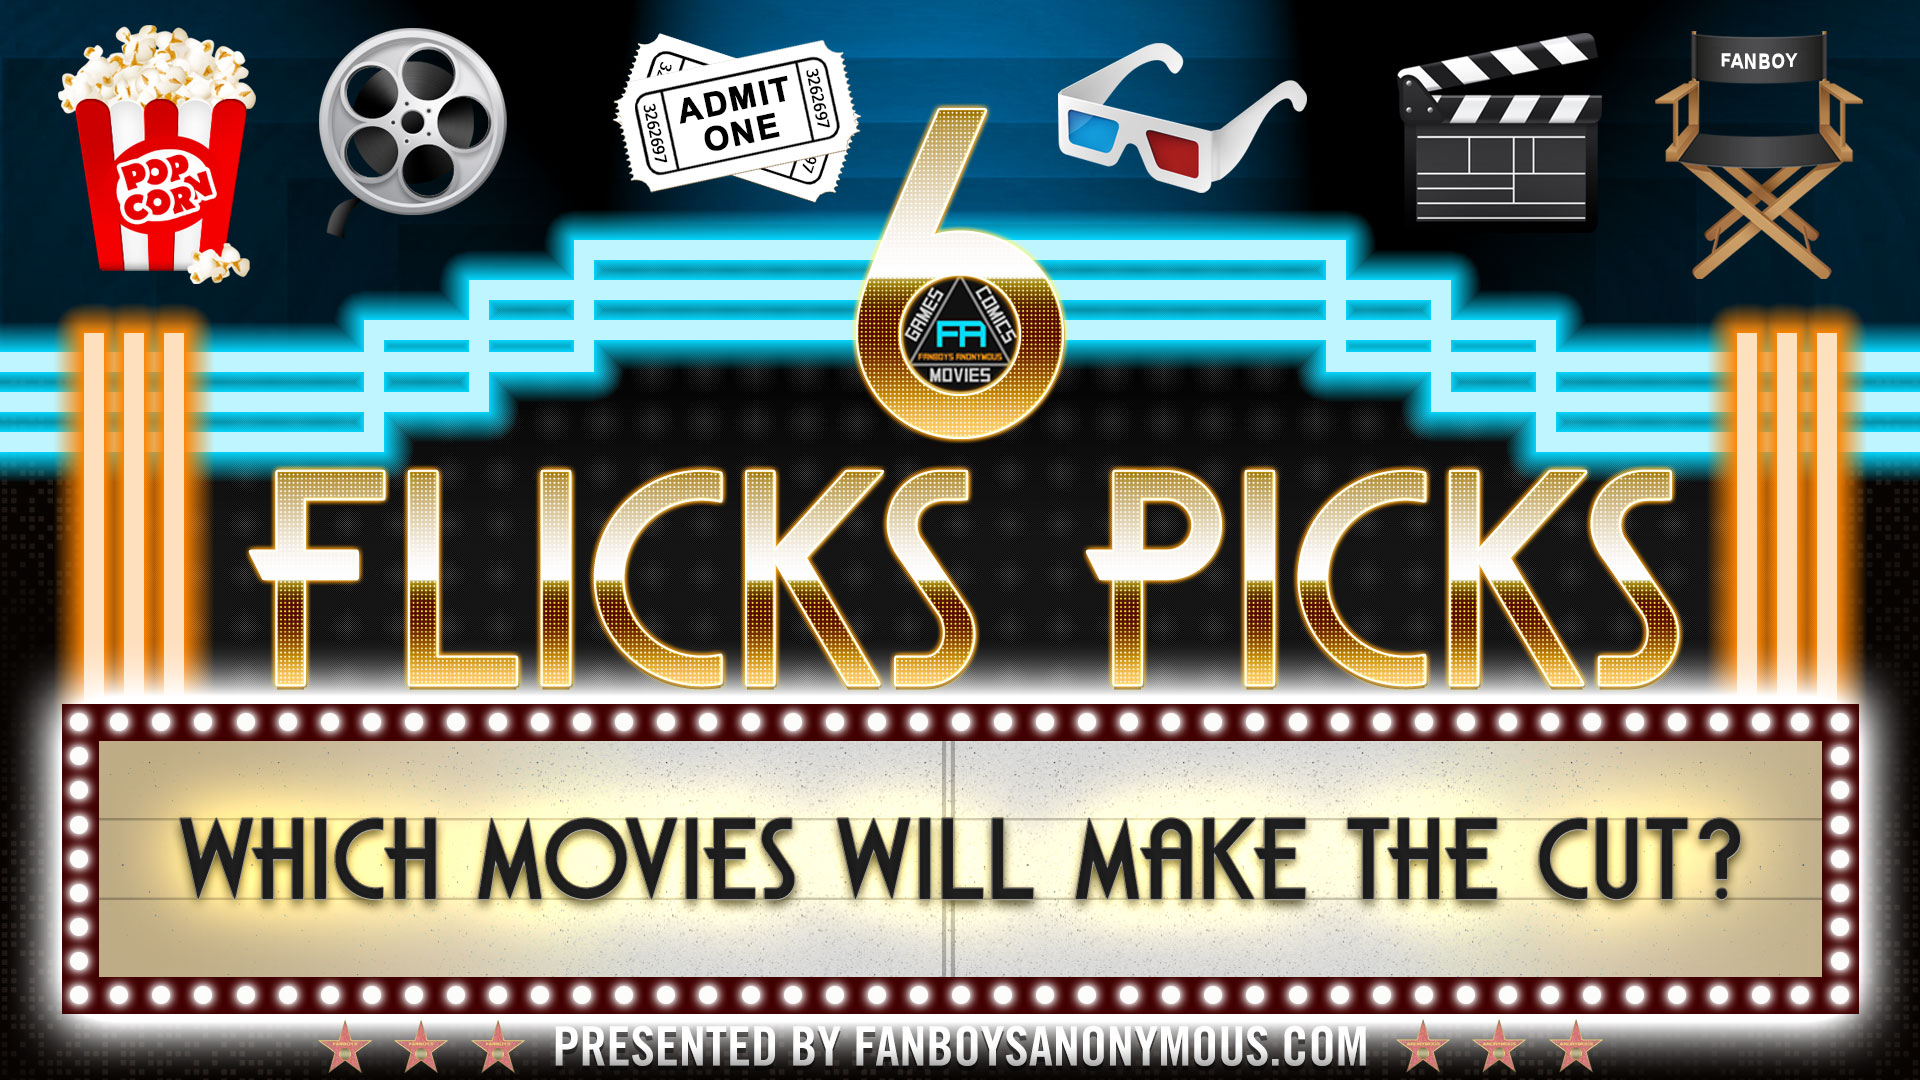 What movies are coming out TheMonth 2023 6 Flicks Picks